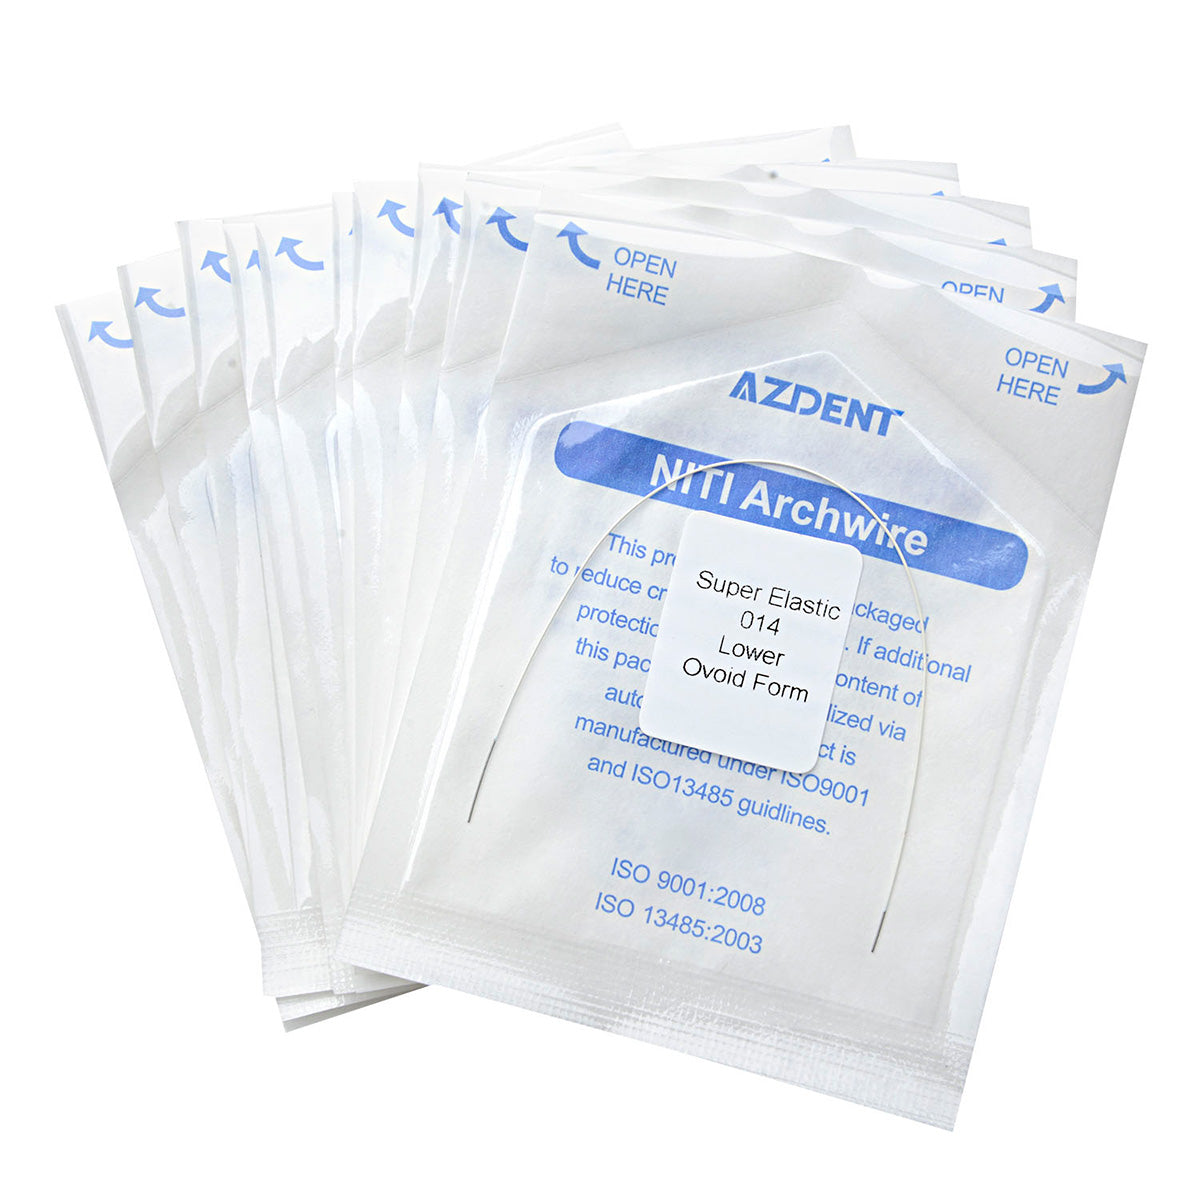 10 Packs AZDENT Archwire NiTi Super Elastic Colored Coated Ovoid Round 0.014 Lower 1pcs/Pack - azdentall.com